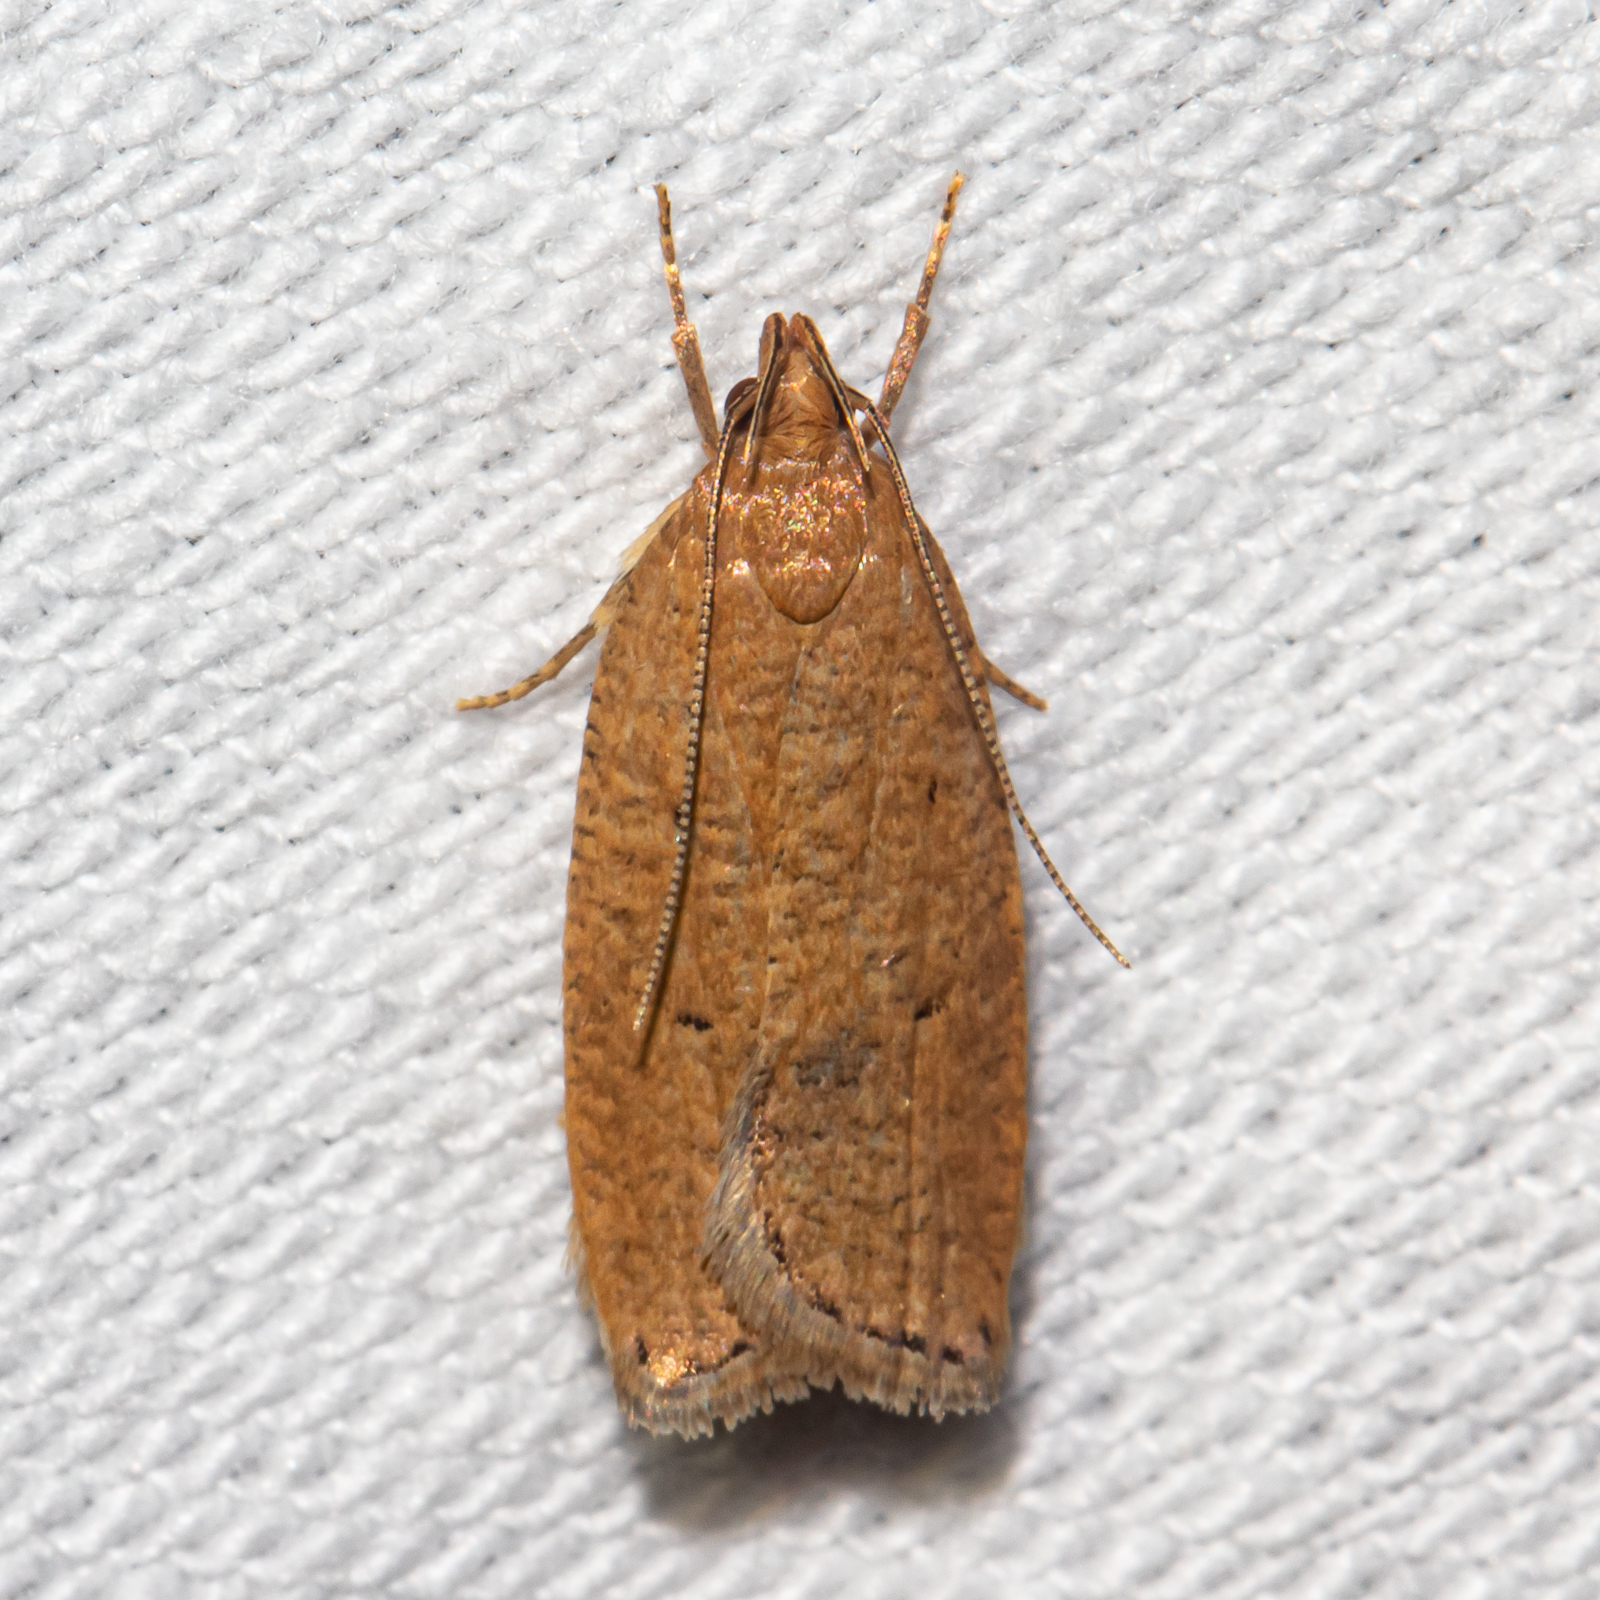 Maryland Biodiversity Project - Dotted Leaftier Moth (Psilocorsis ...